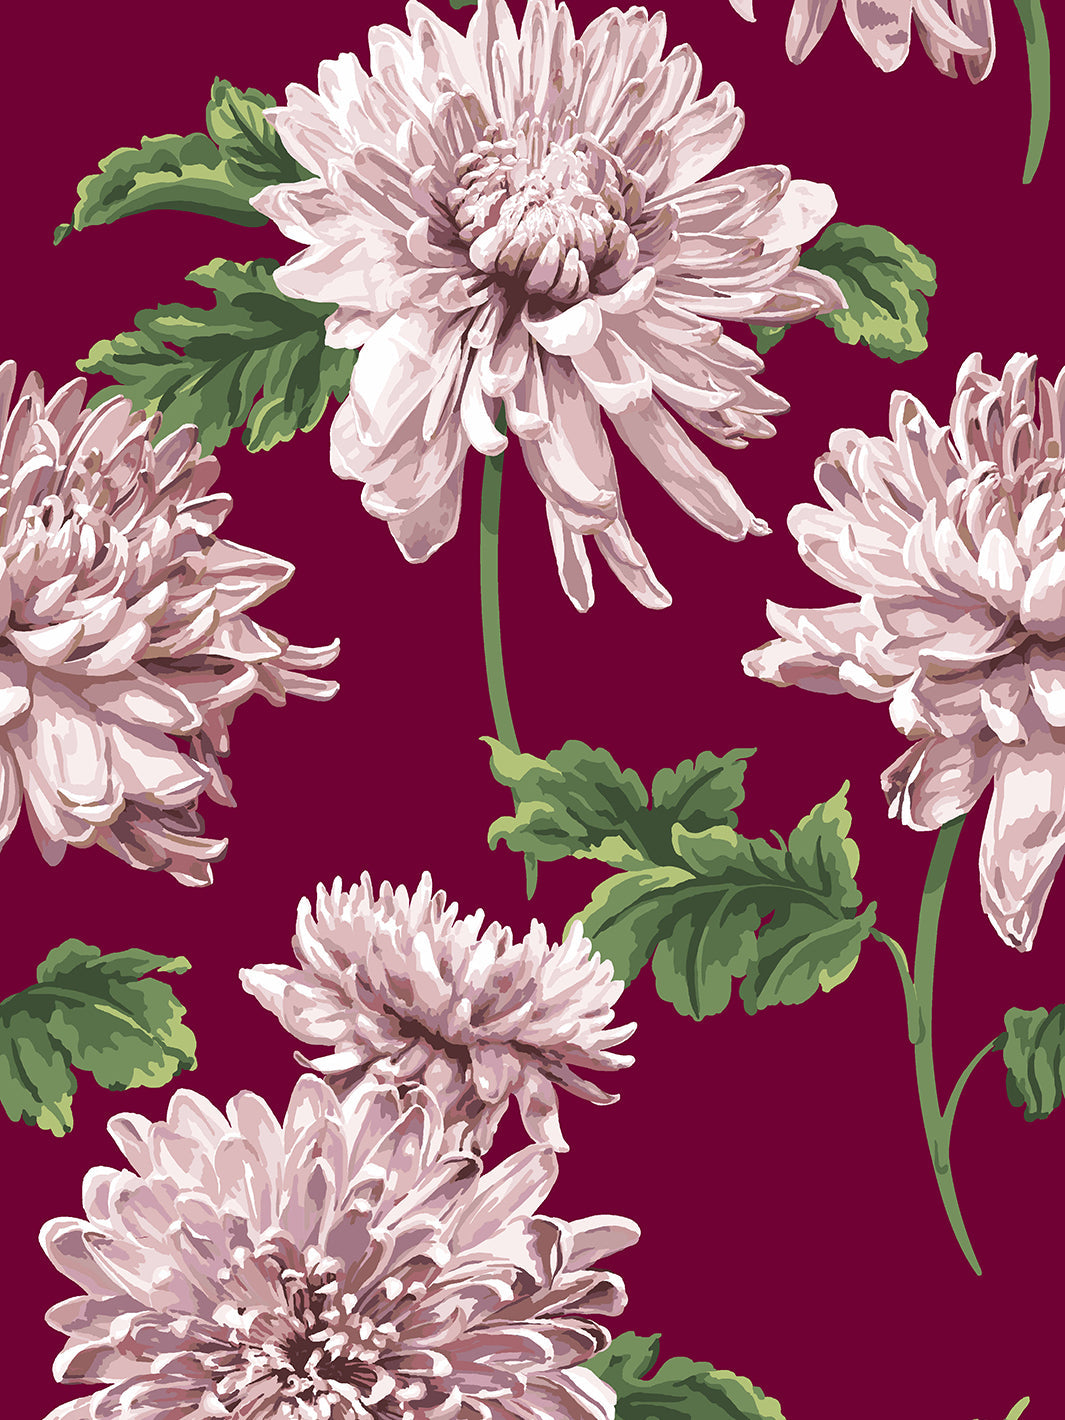 'Mums for Marion' Wallpaper by Sarah Jessica Parker - Claret